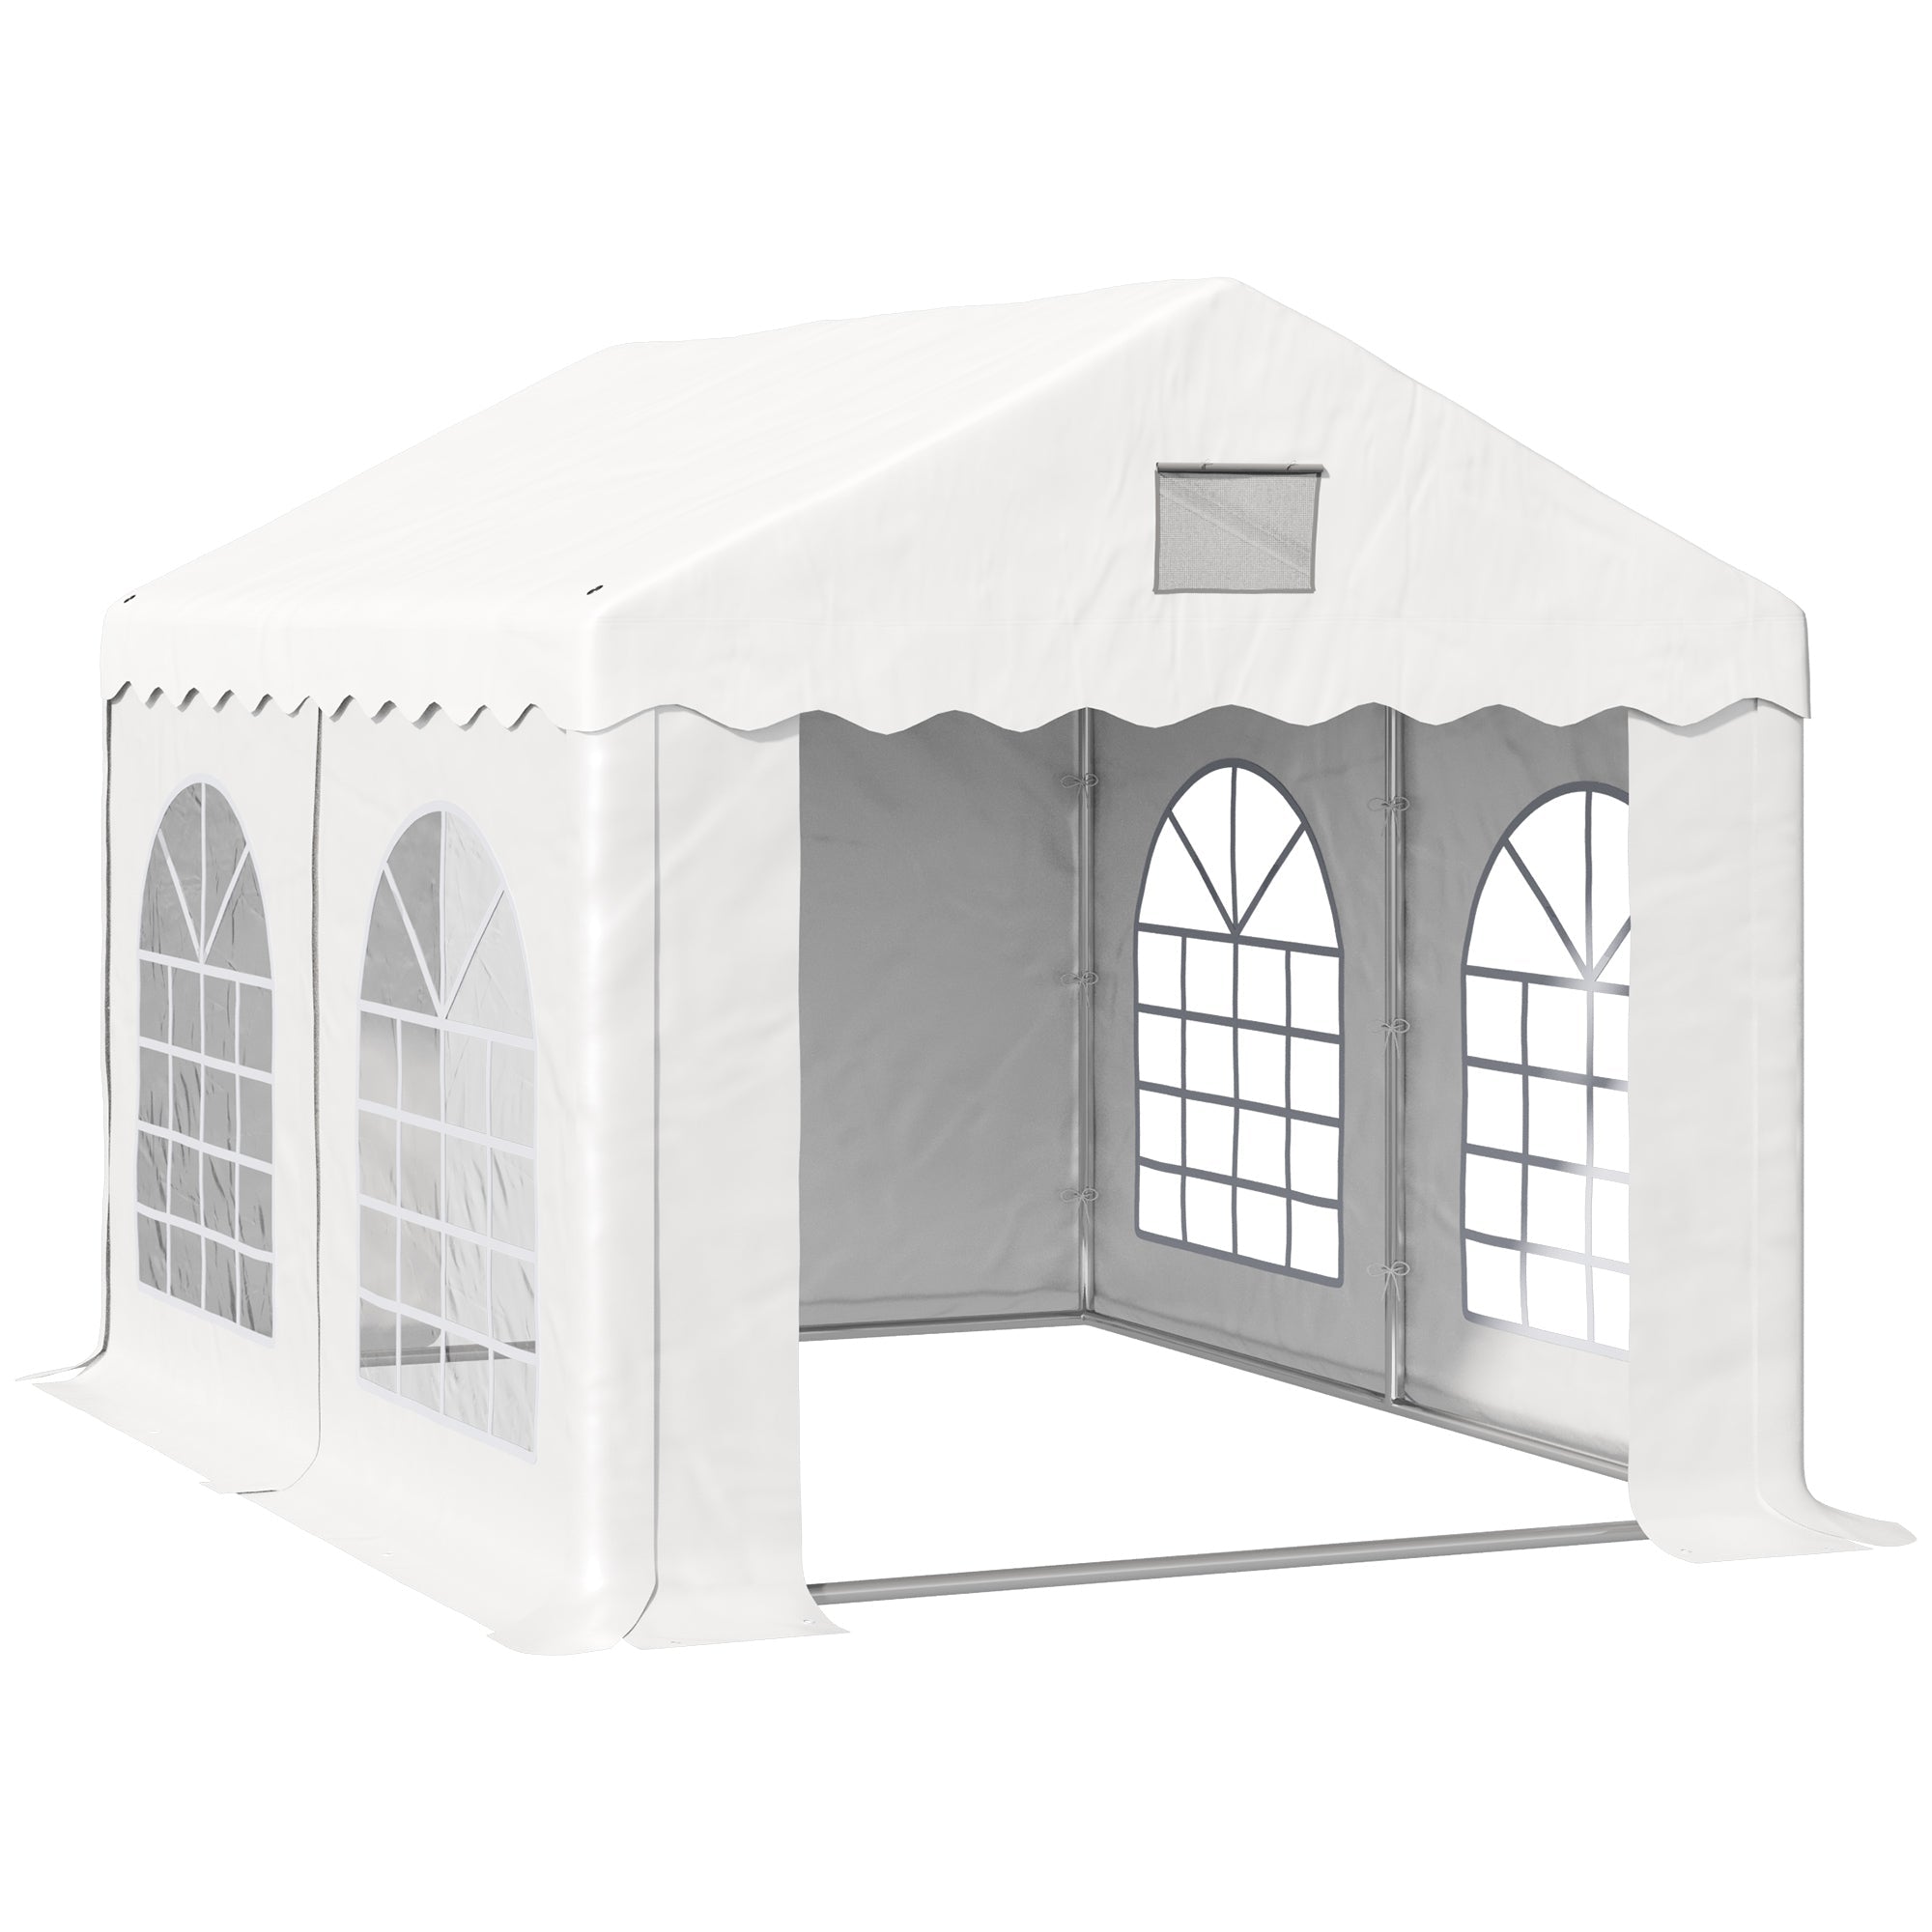 4 x 3 m Gazebo Canopy Party Tent with 4 Removable Side Walls and Windows for Outdoor Event, White-0